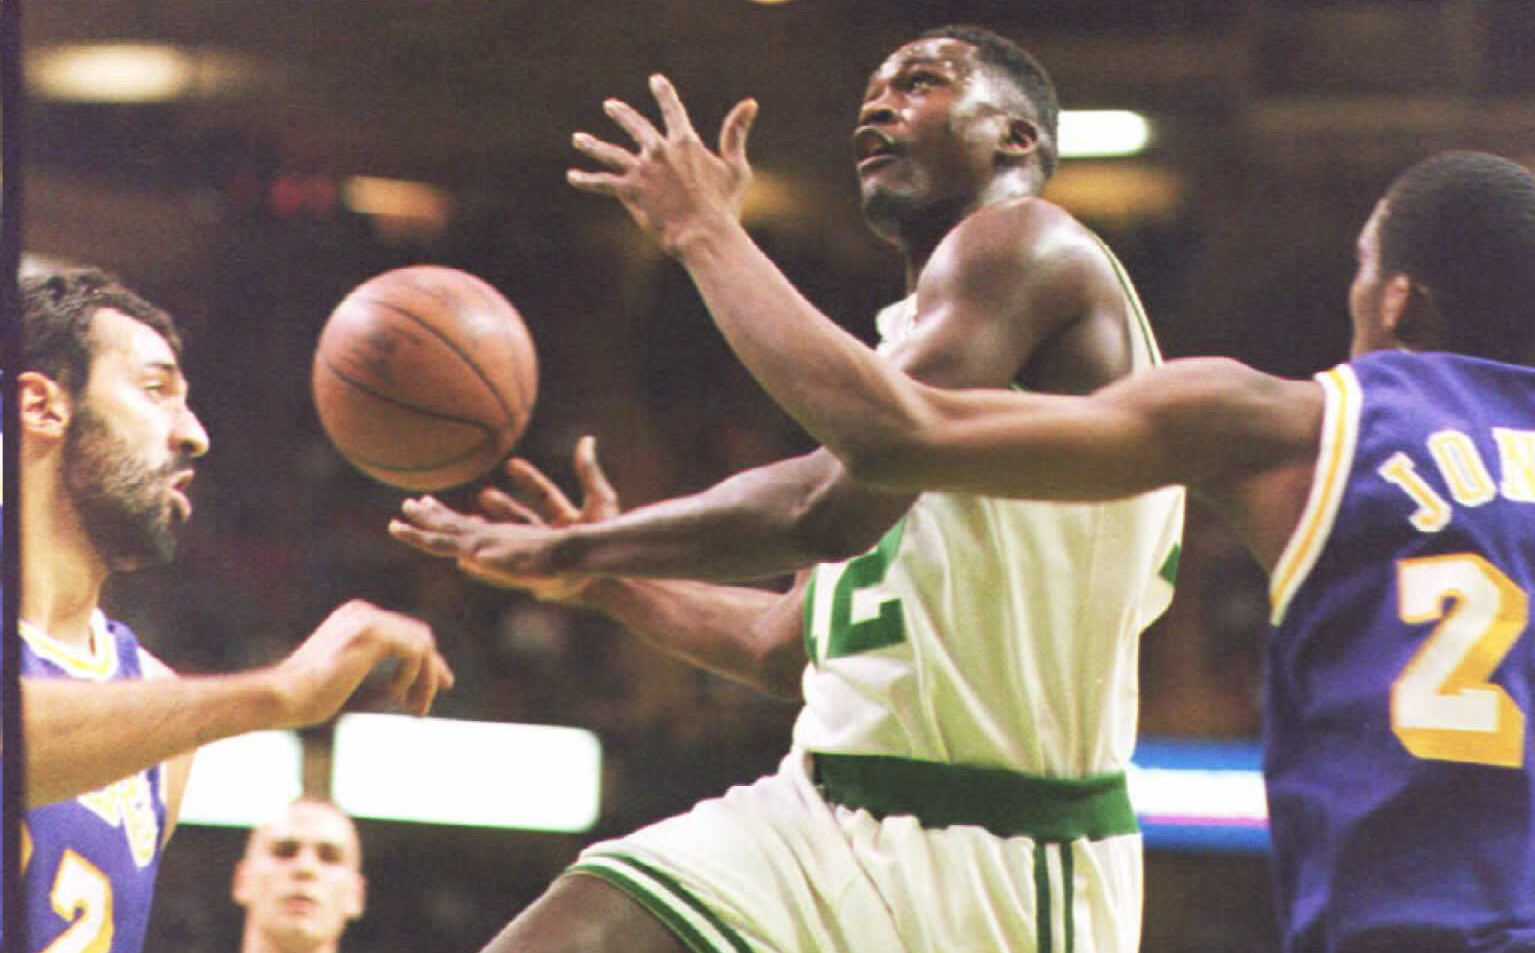 Dominique Wilkins of the Boston Celtics drives to the basket.